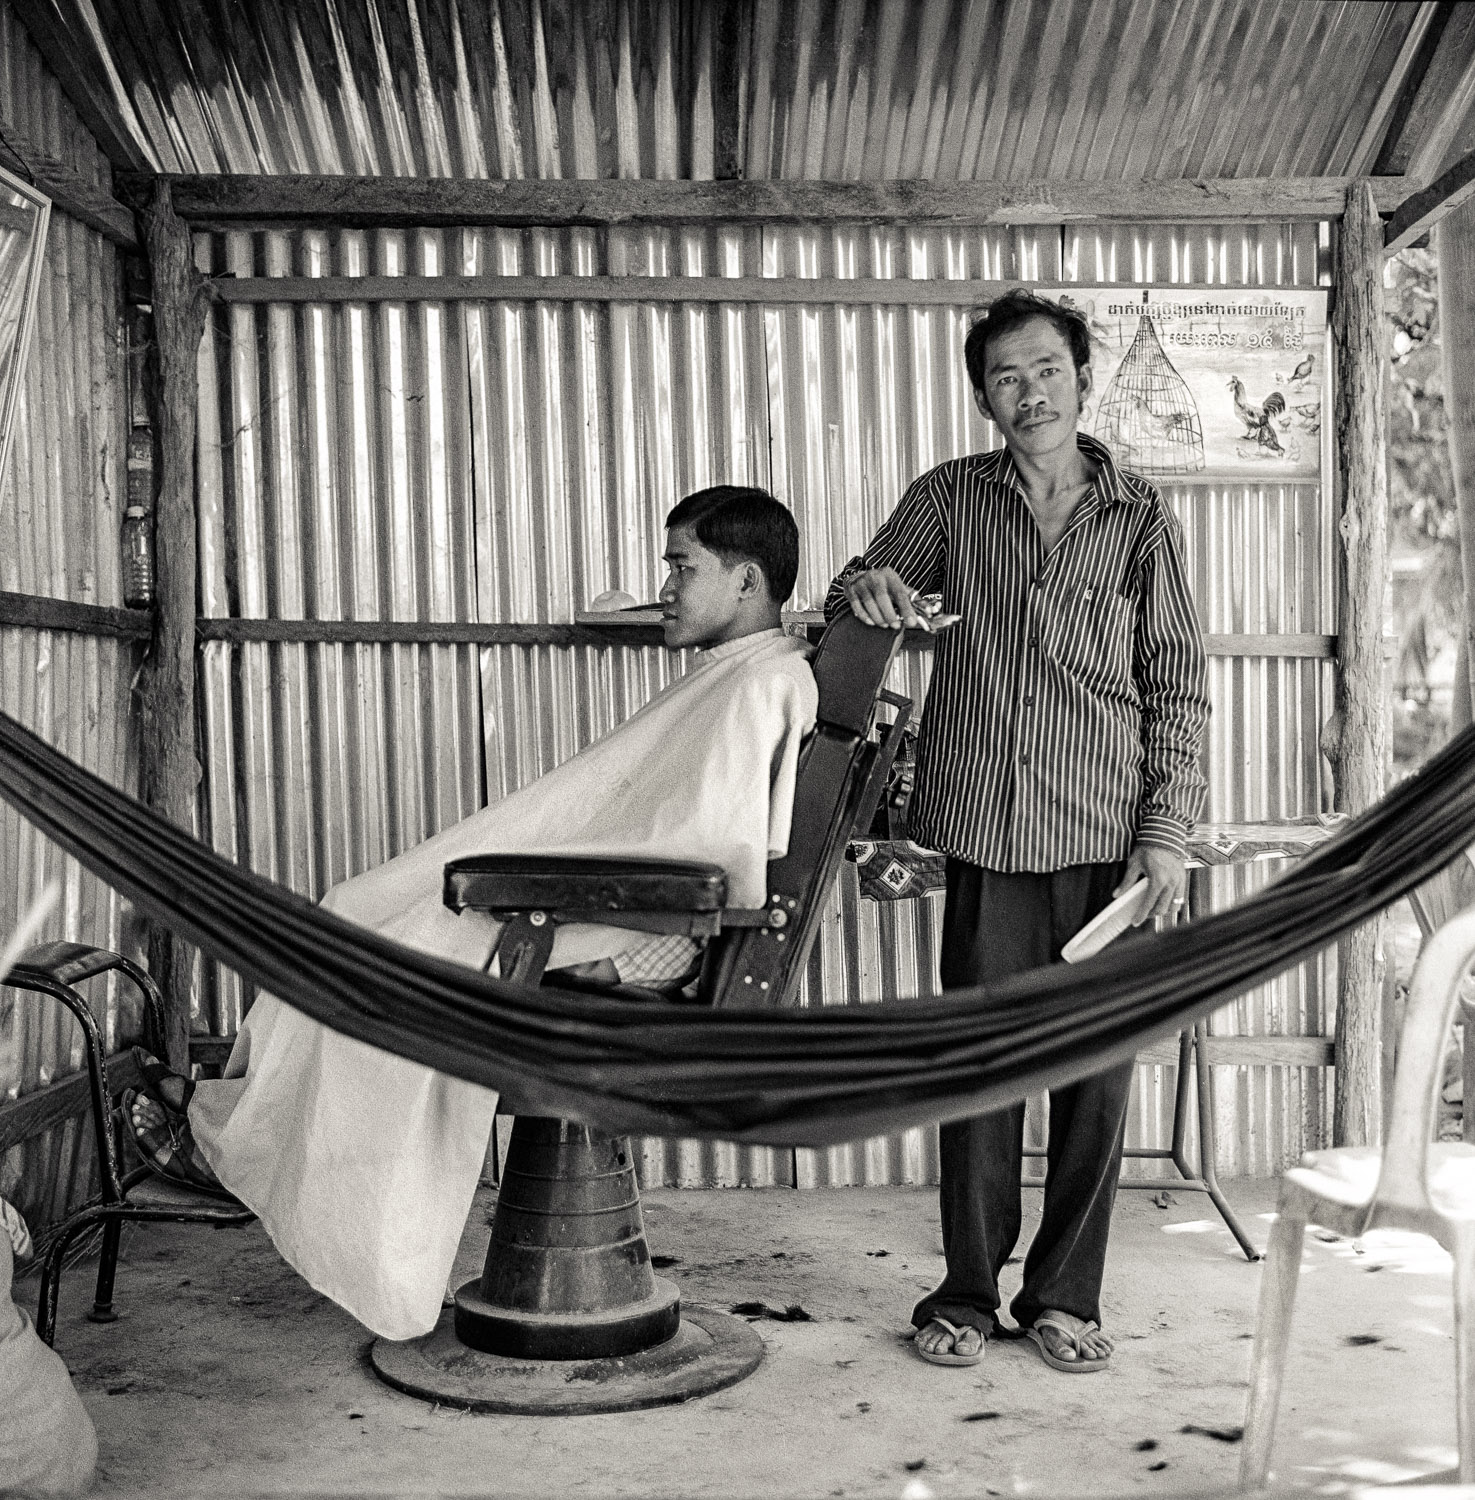  Kop is a barber training graduate from DDP, he has been operating his own barber shop since 2014. 37 yrs old.  Before opening his shop, Kop attended the DDP education program in Kampot and vocational training in Phnom Penh.  He lives with his mother